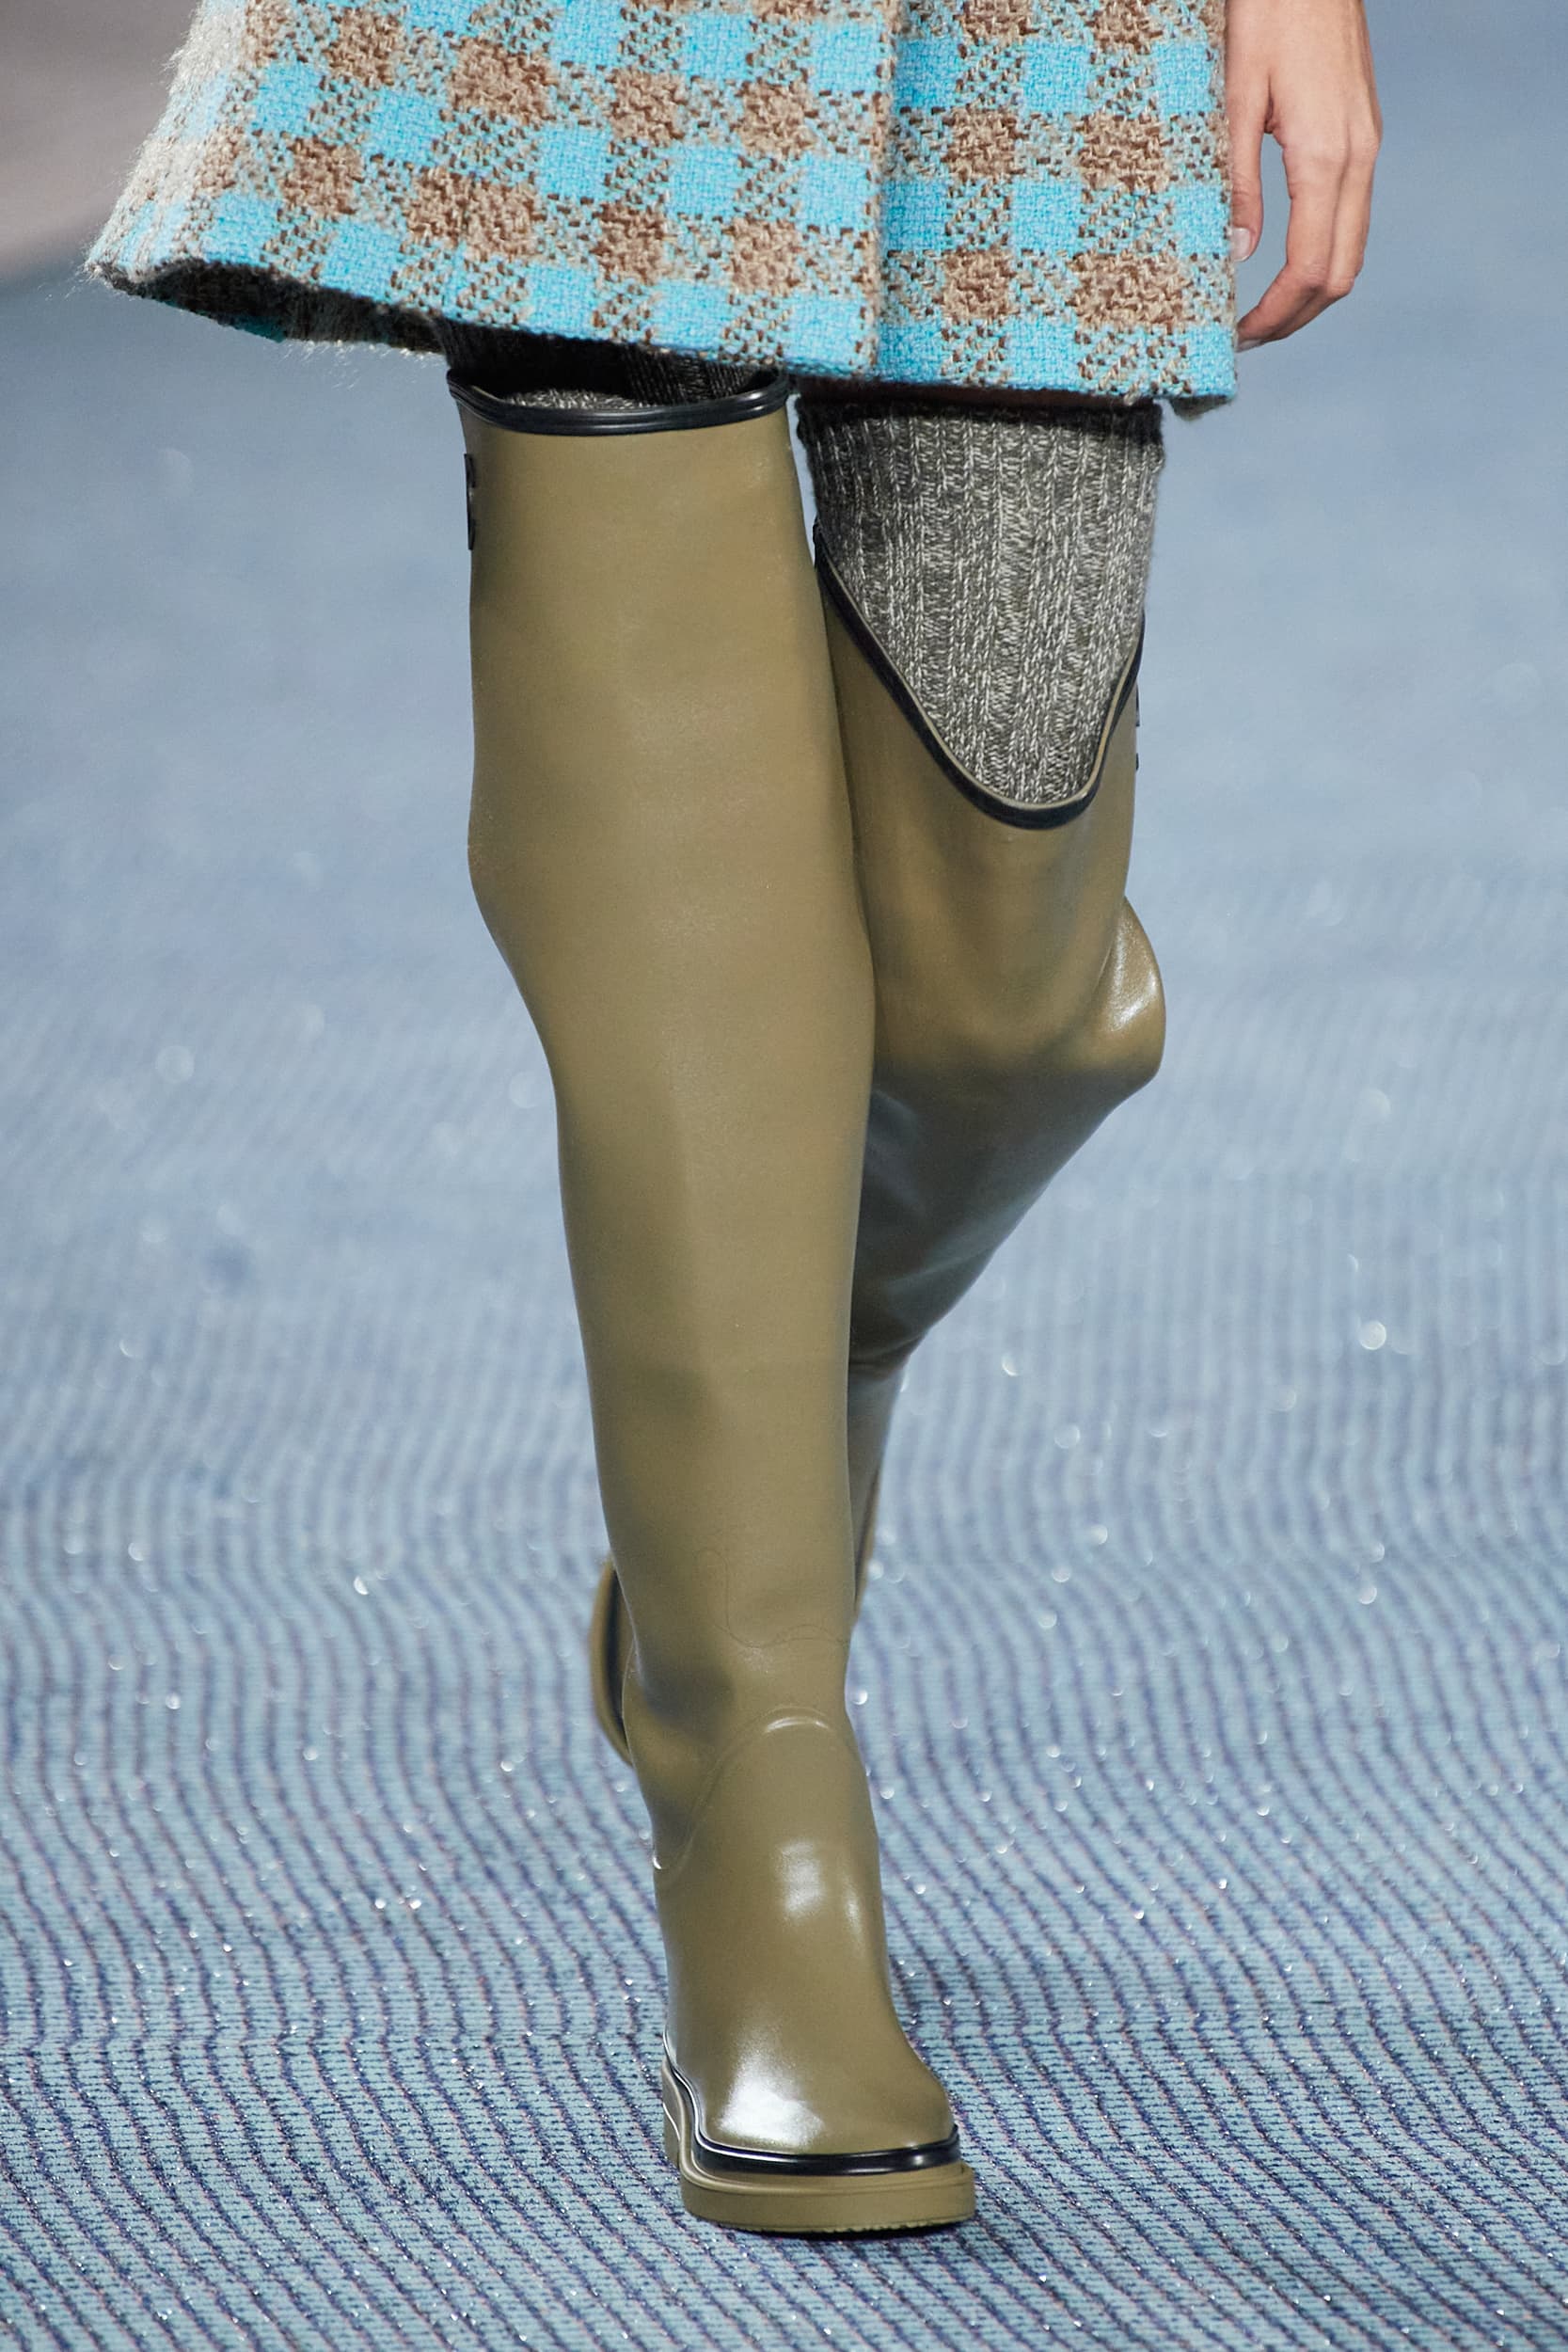 Over the Knee Boots Fall 2022 Fashion Trend | The Impression